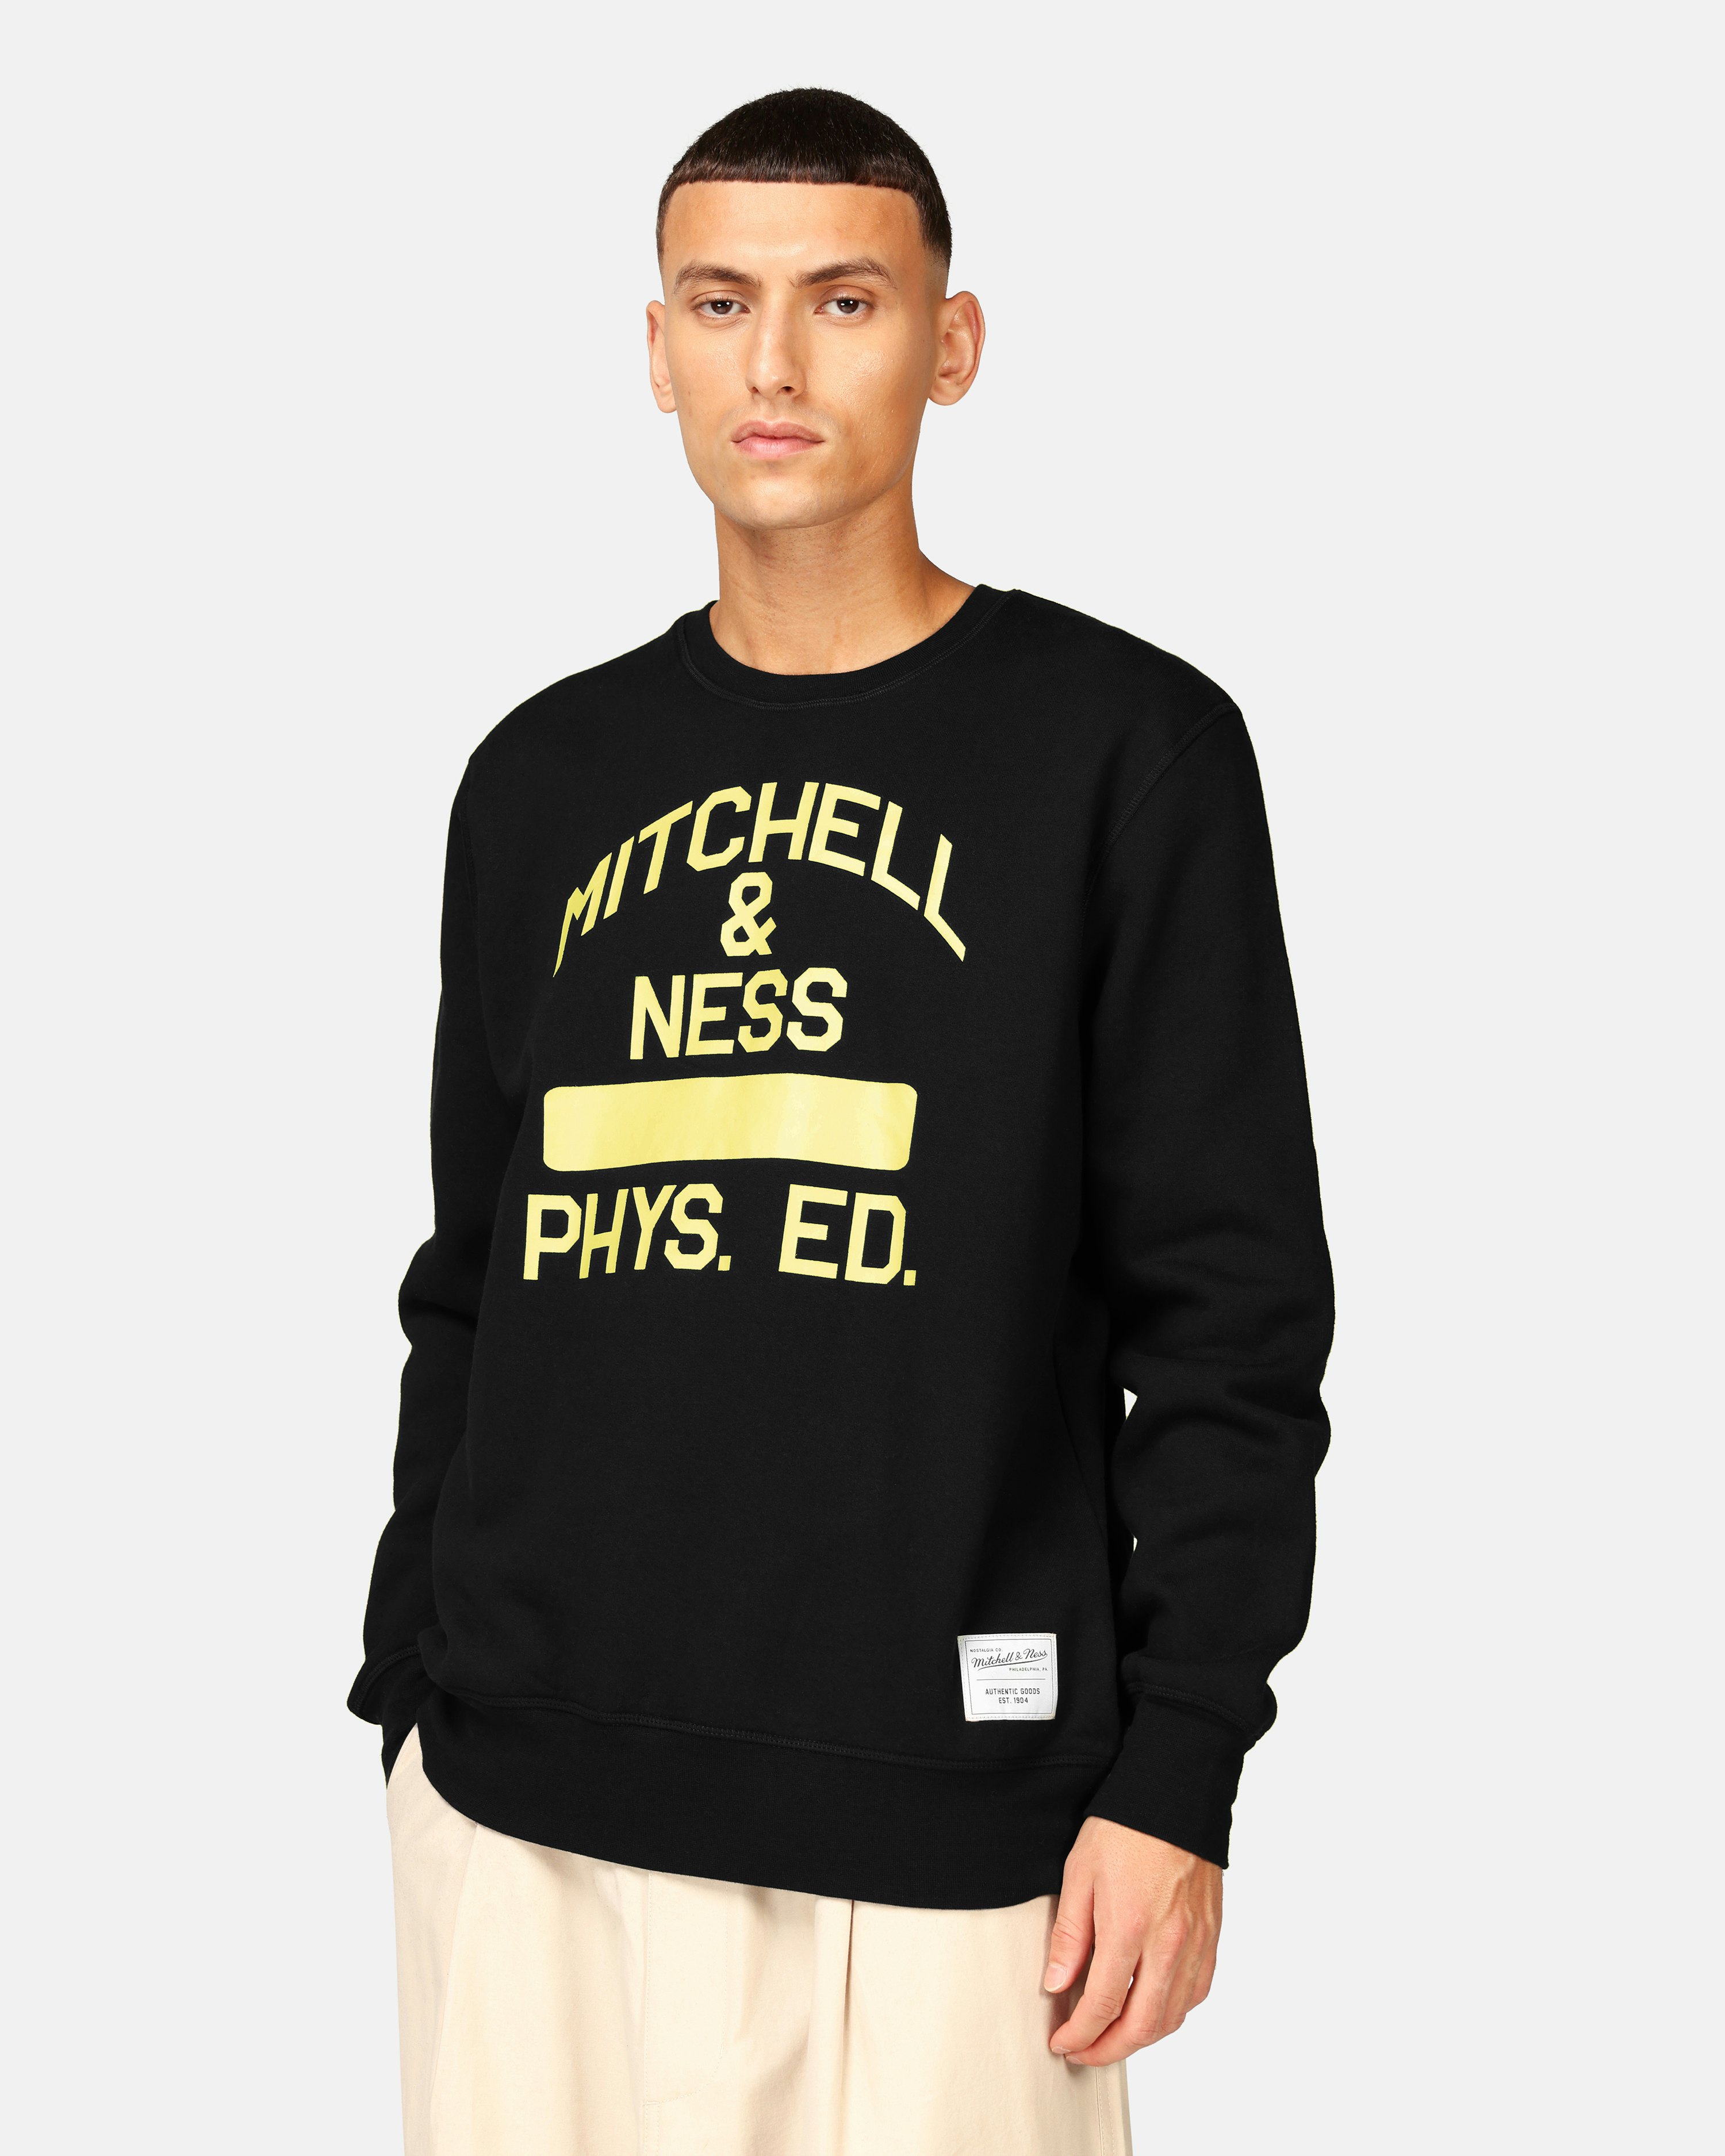 Mitchell and ness phys ed shirt, hoodie, longsleeve, sweater